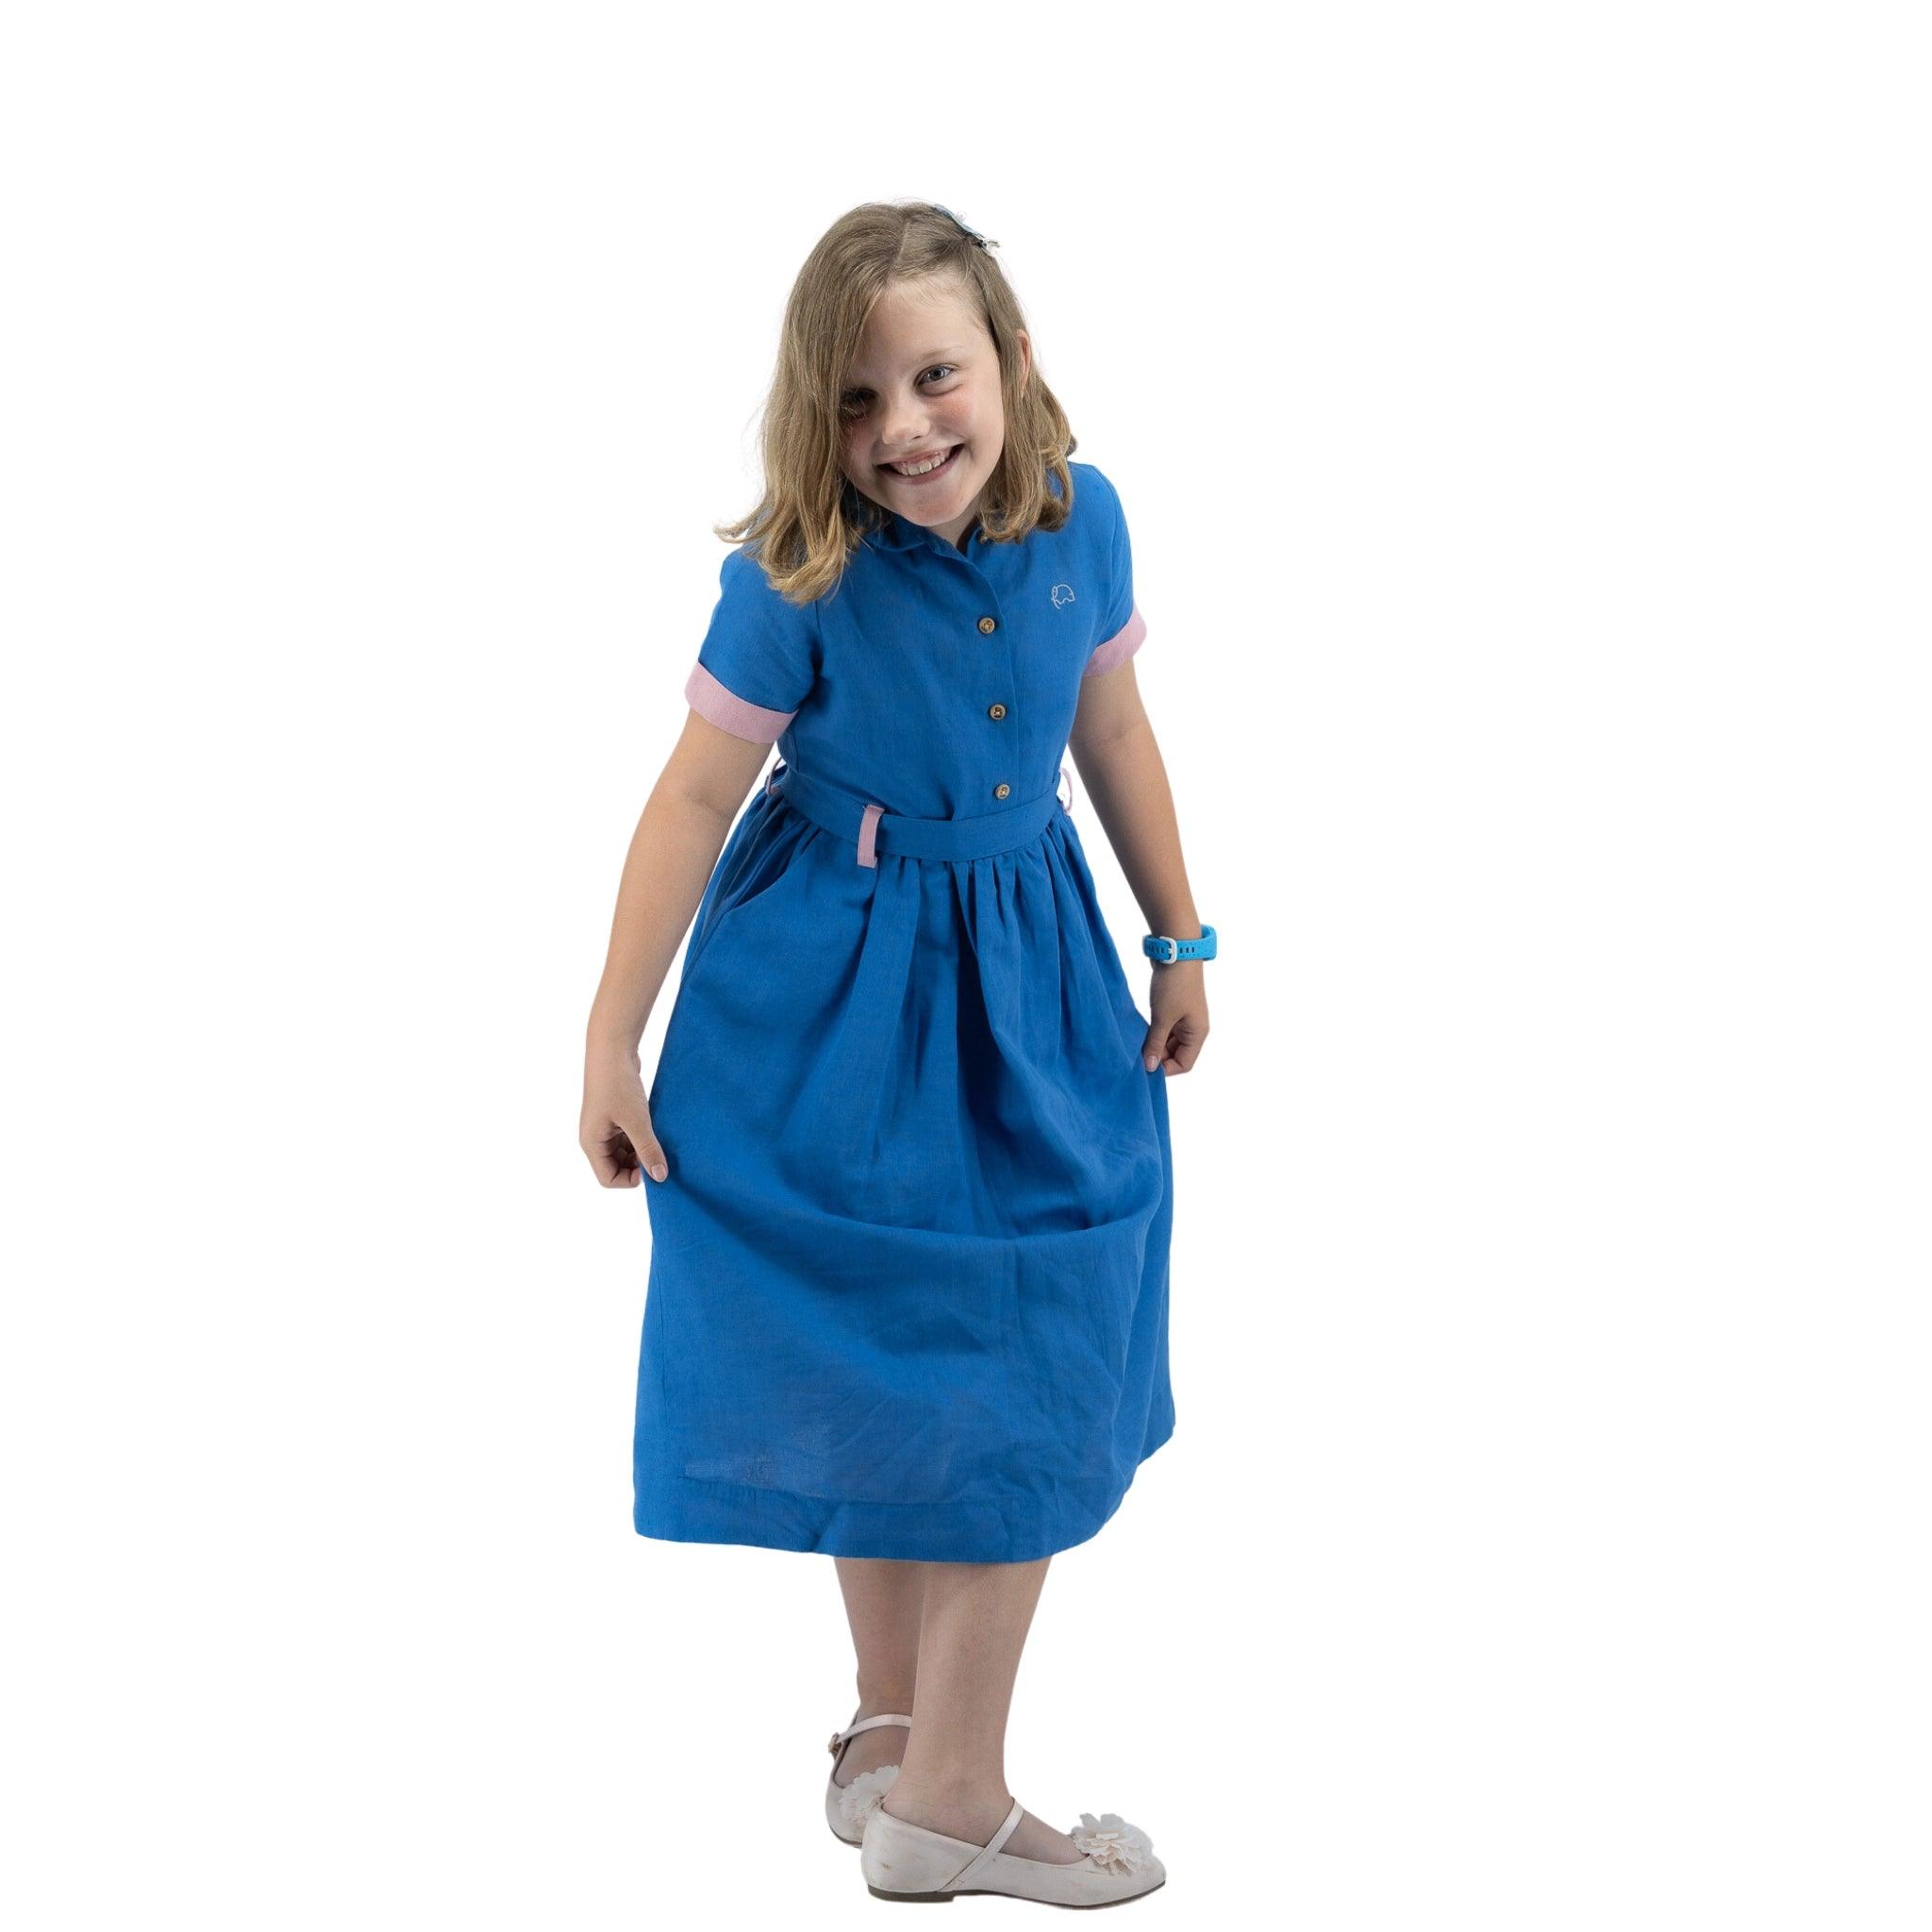 Young girl in a Karee Parisian Blue Linen Dress for Girls smiling and posing, standing against a white background.